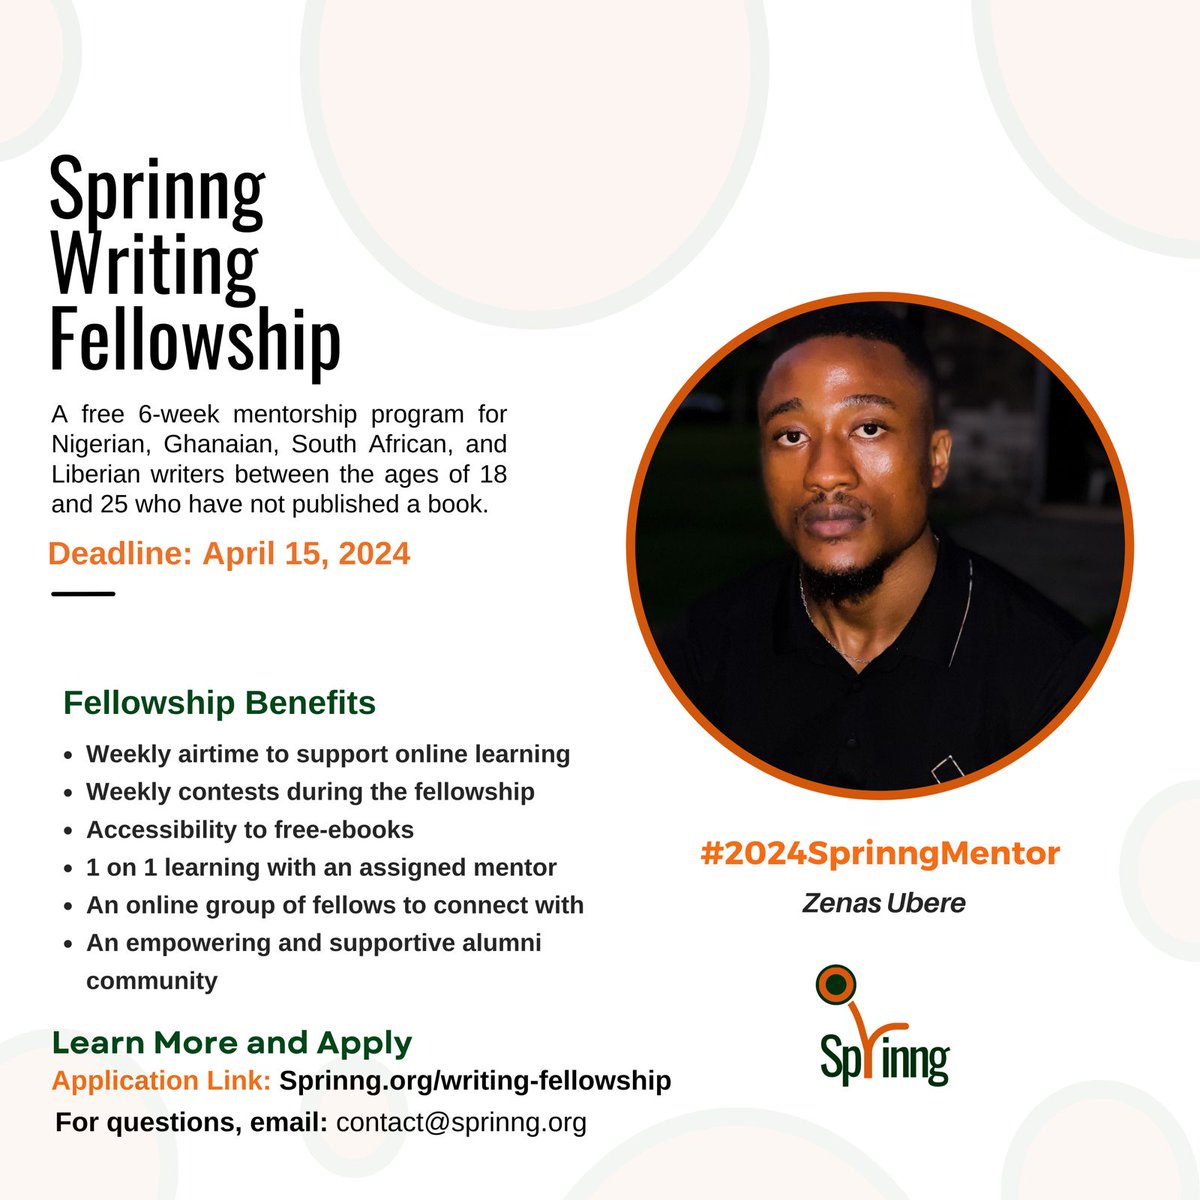 Glad to announce that I will be serving as a mentor for this year’s @SprinngLM Writing Fellowship. Visit sprinng.org/writing-fellow… to learn more and apply by April 15! #2024SprinngMentor